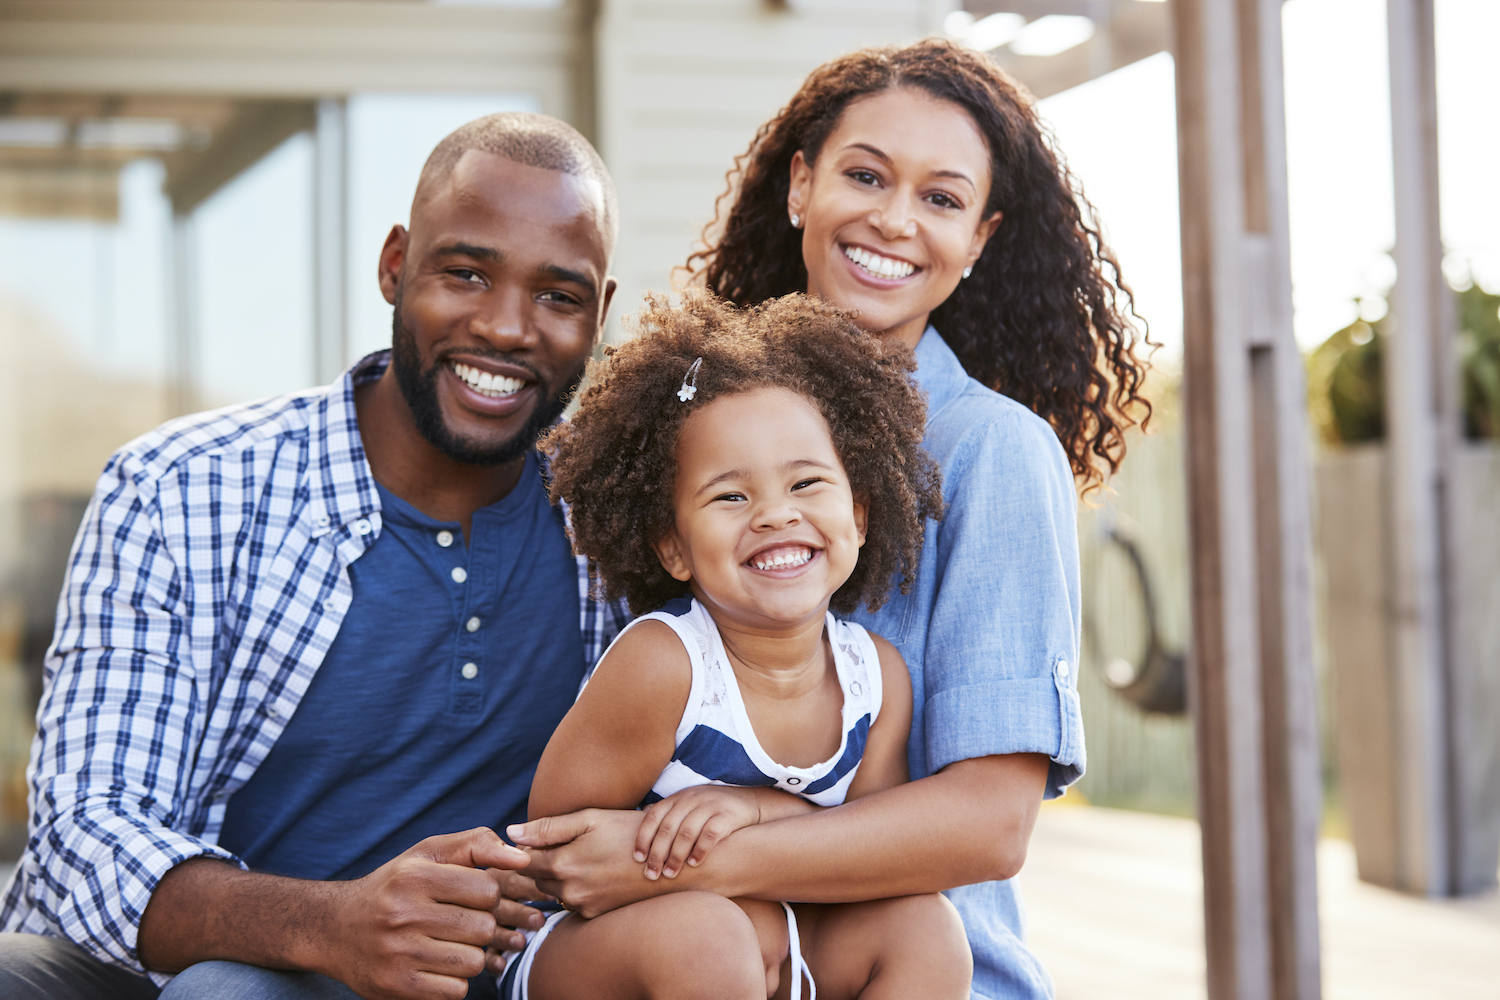 A Black mom and dad smile with their adorable daughter before visiting their family dentist at CarolinasDentist